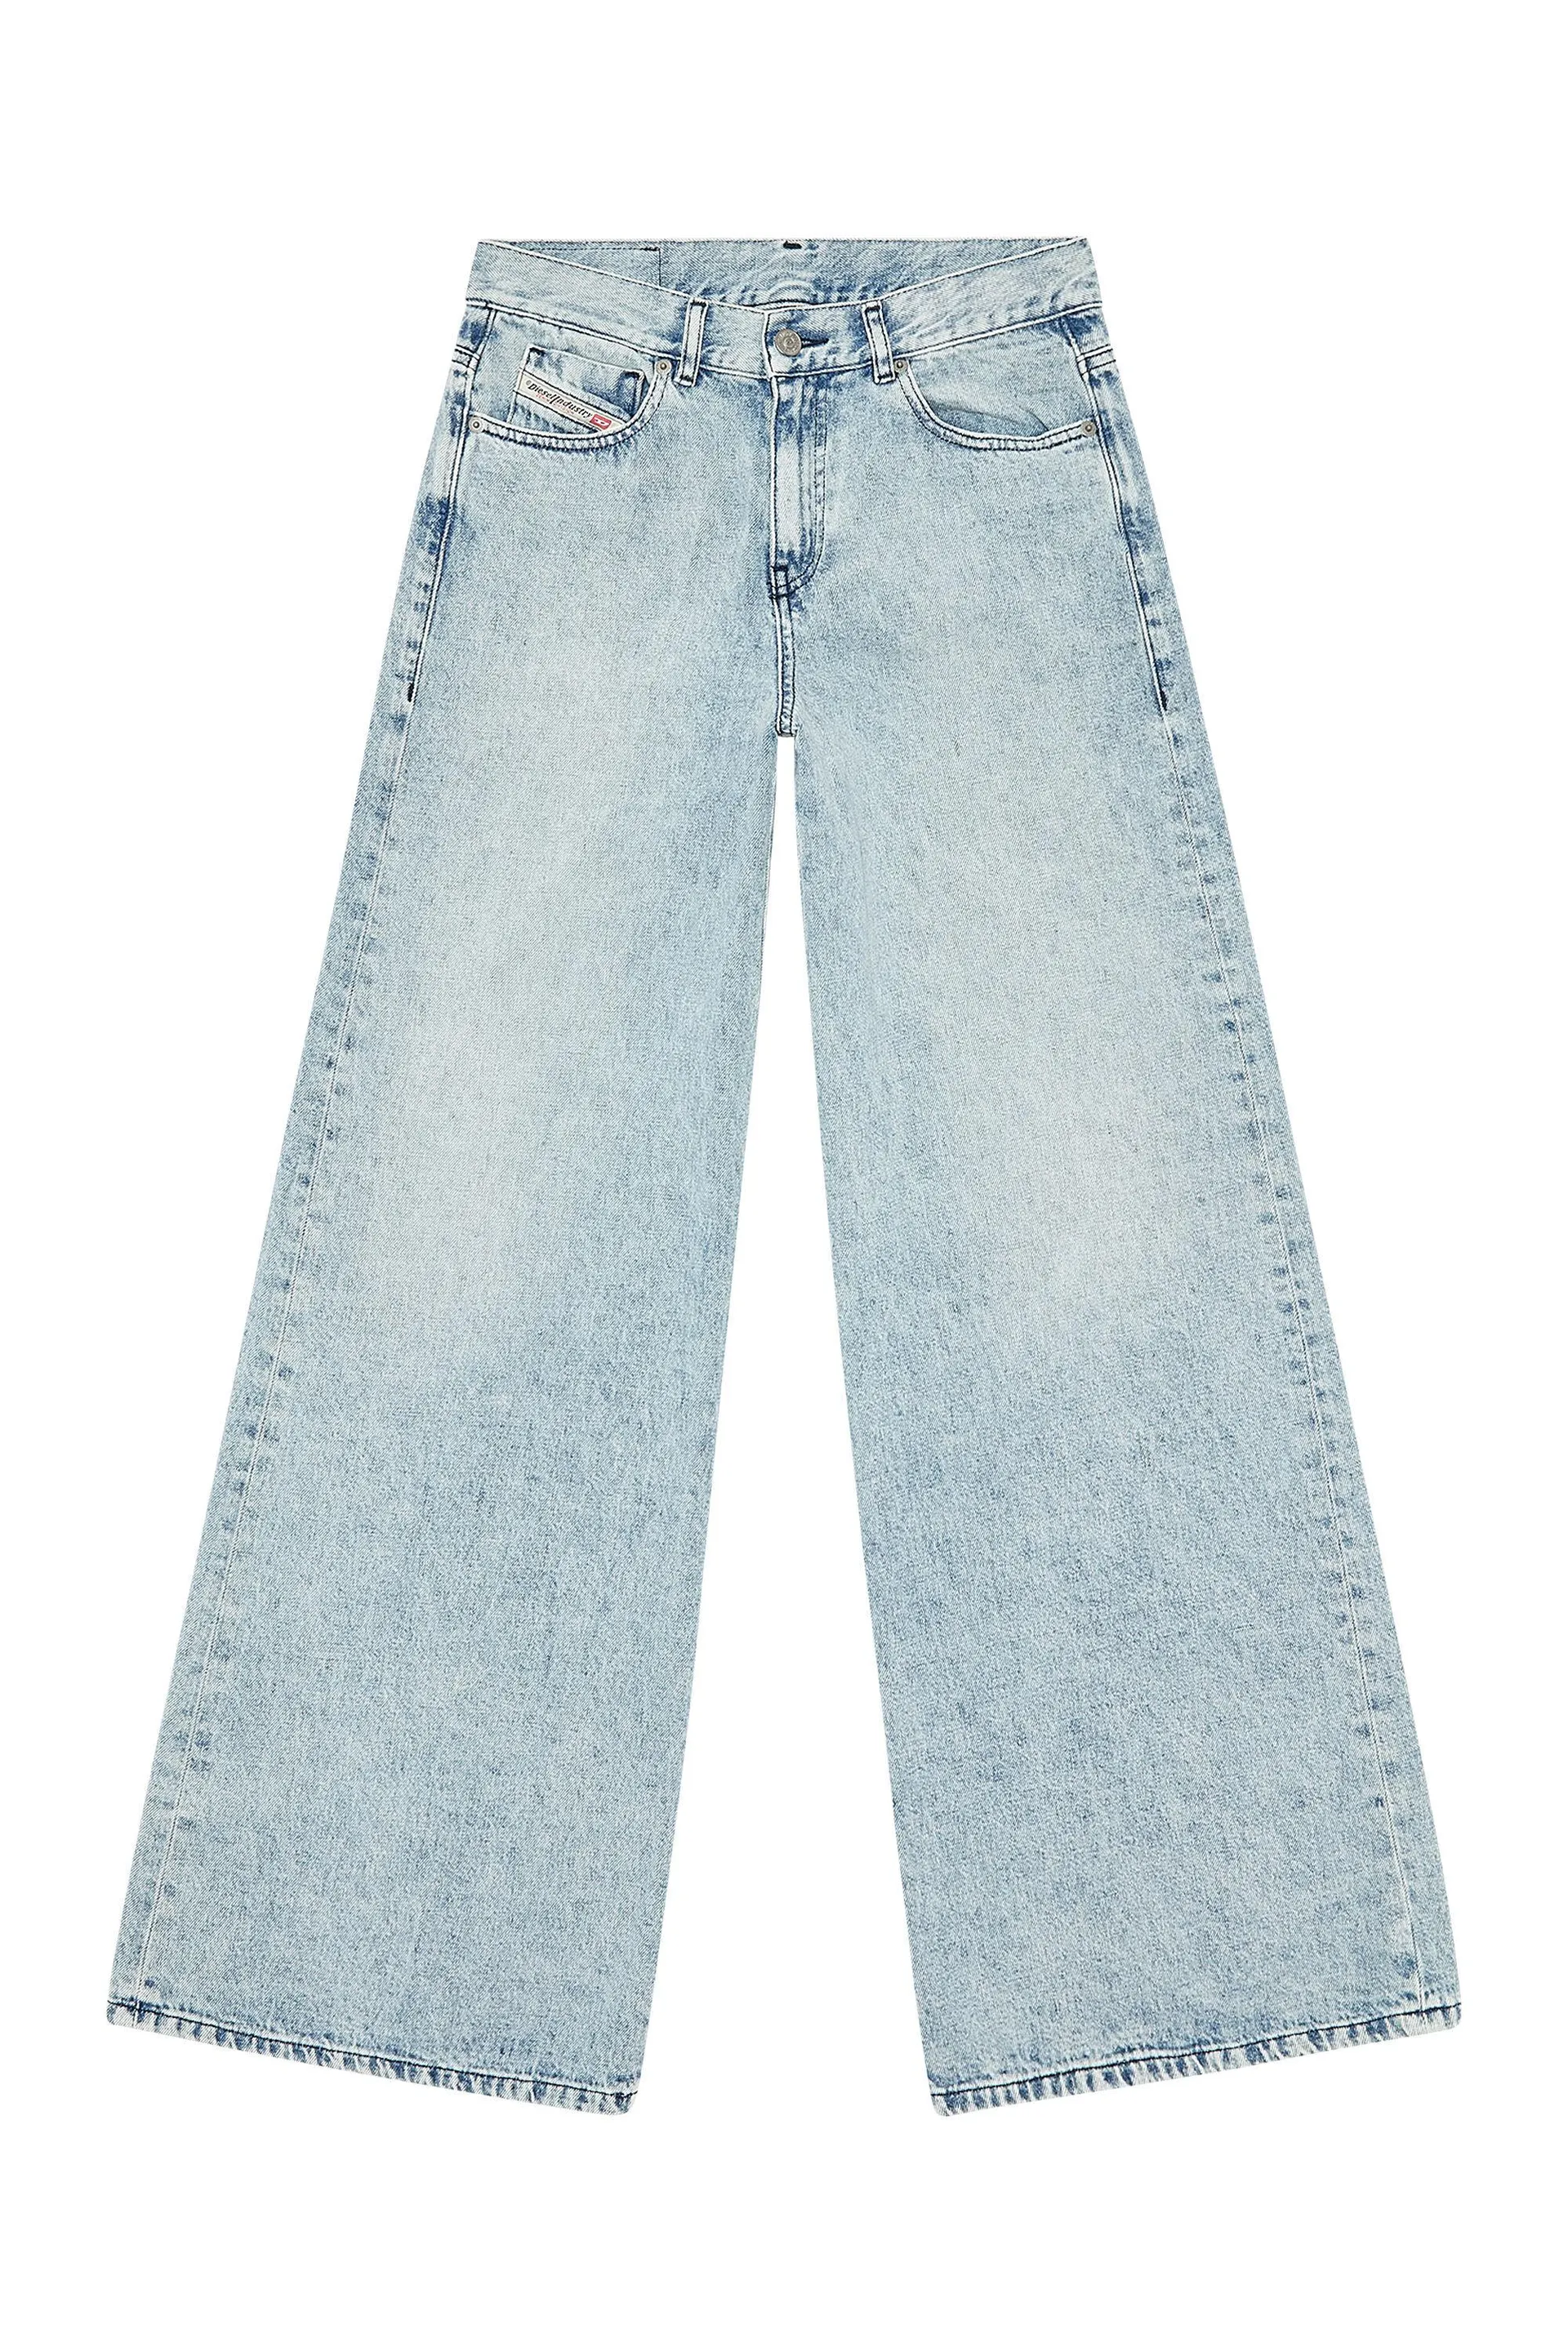 bootcut and flare jeans 1978 d-akemi 09i79